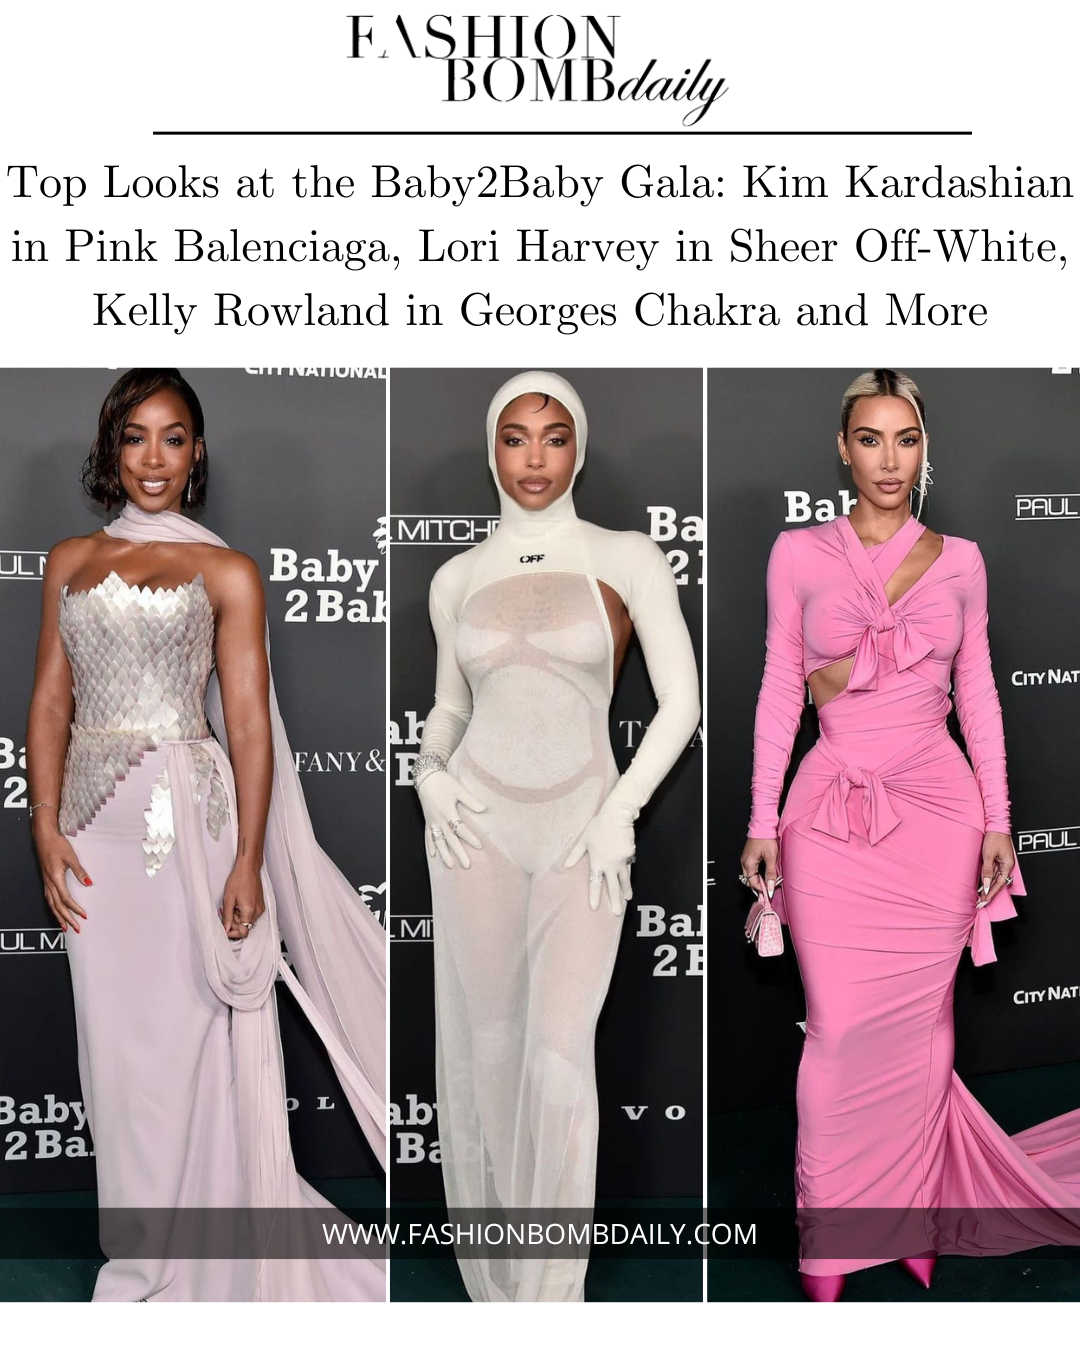 Top Looks at the Baby 2 Baby Gala Kim Kardashian in Pink Balenciaga Lori Harvey in Sheer Off White Kelly Rowland in Georges Chakra and More